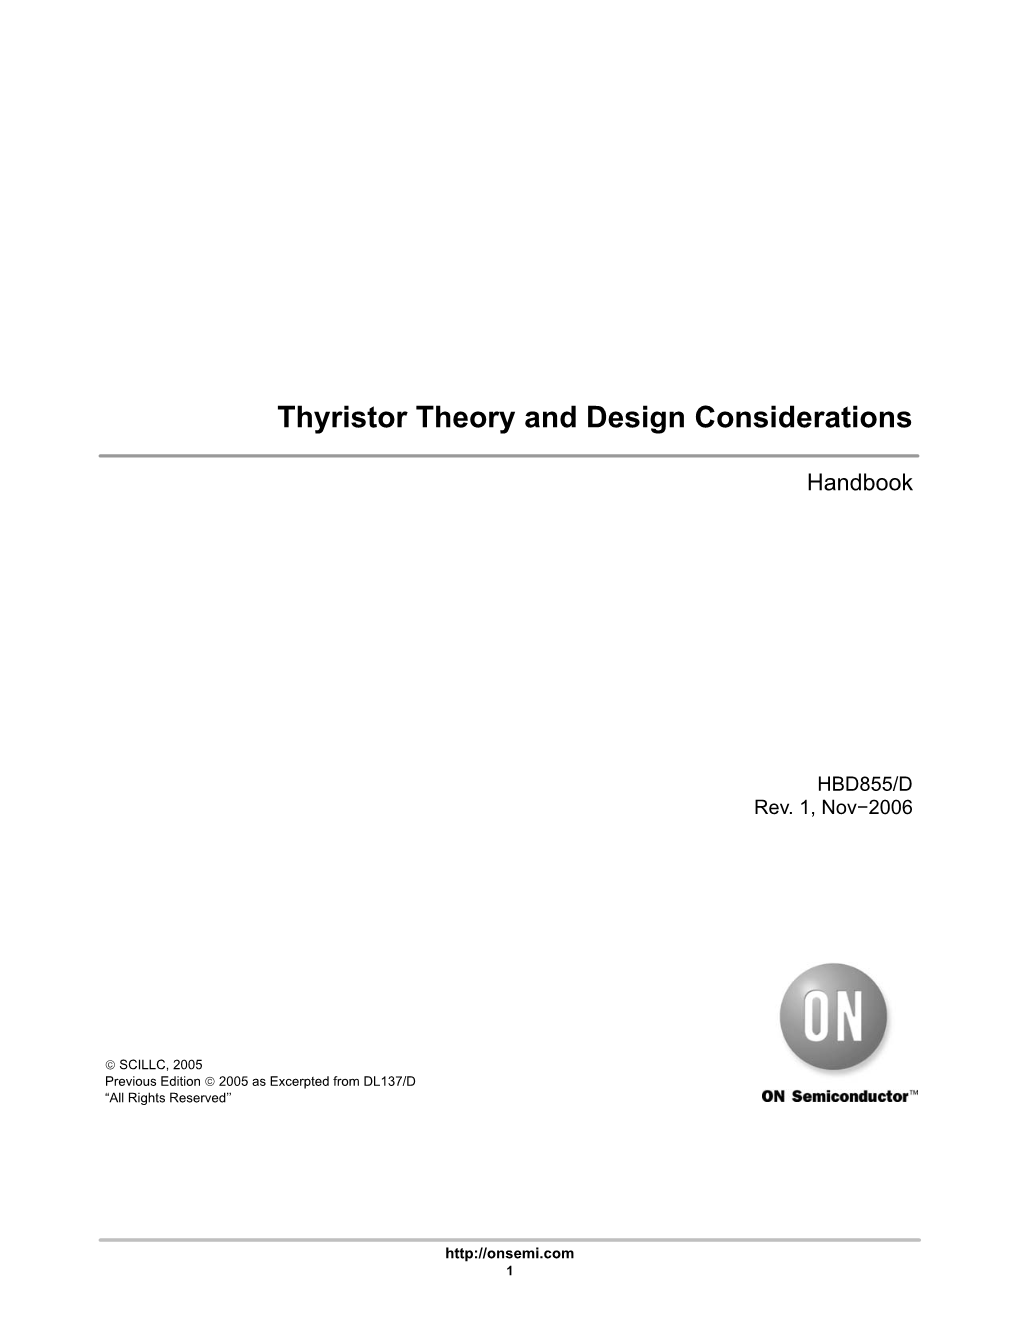 Thyristor Theory and Design Considerations